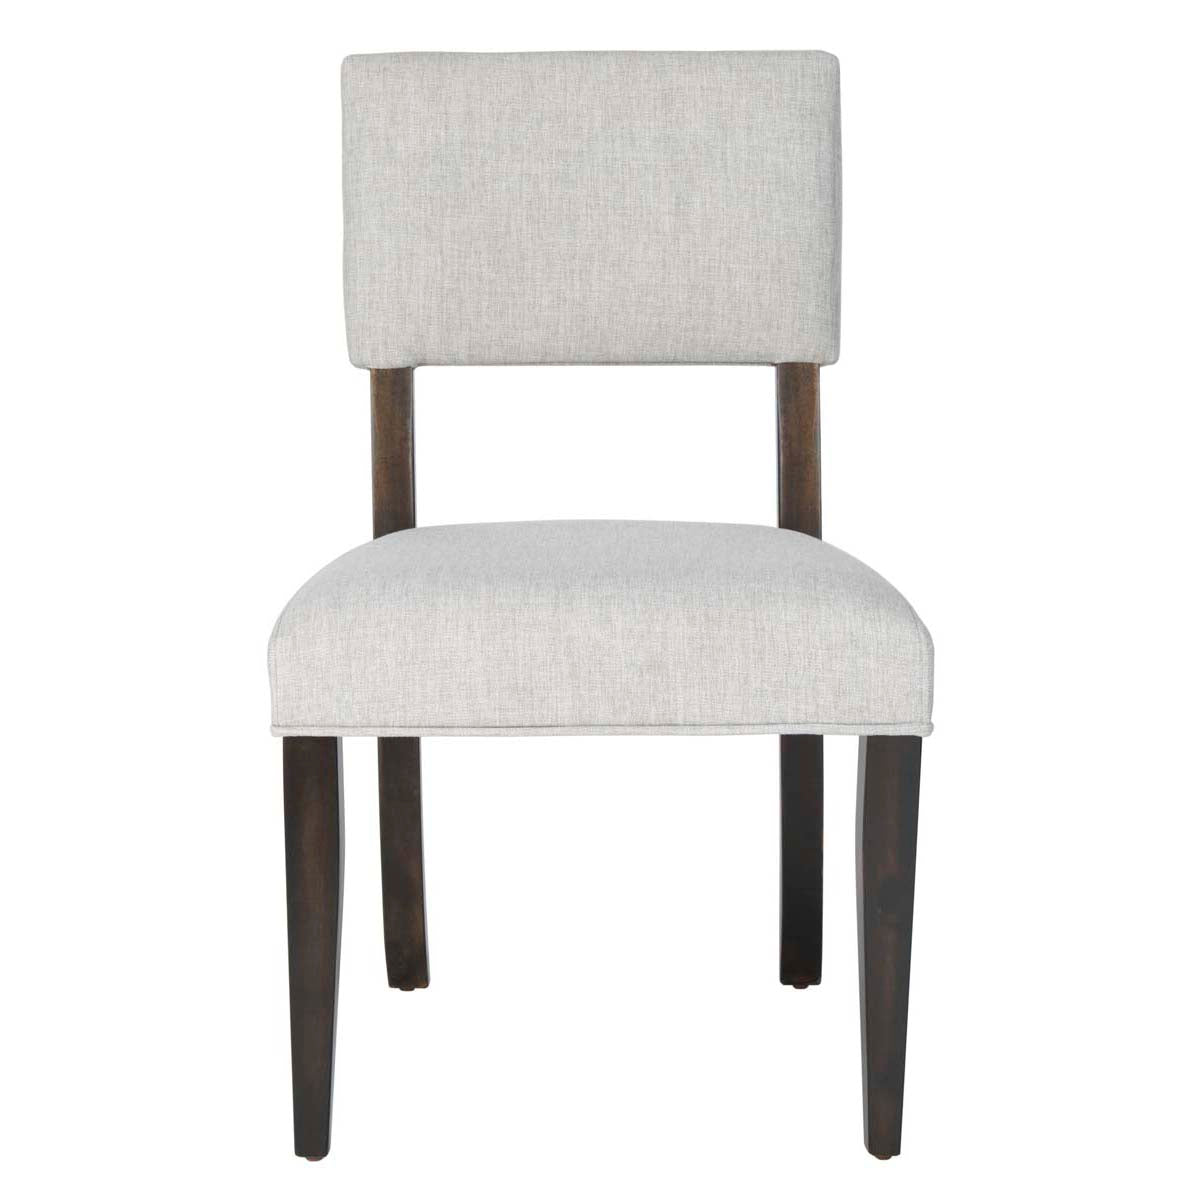 Safavieh Couture Luis Wood Dining Chair, SFV2107